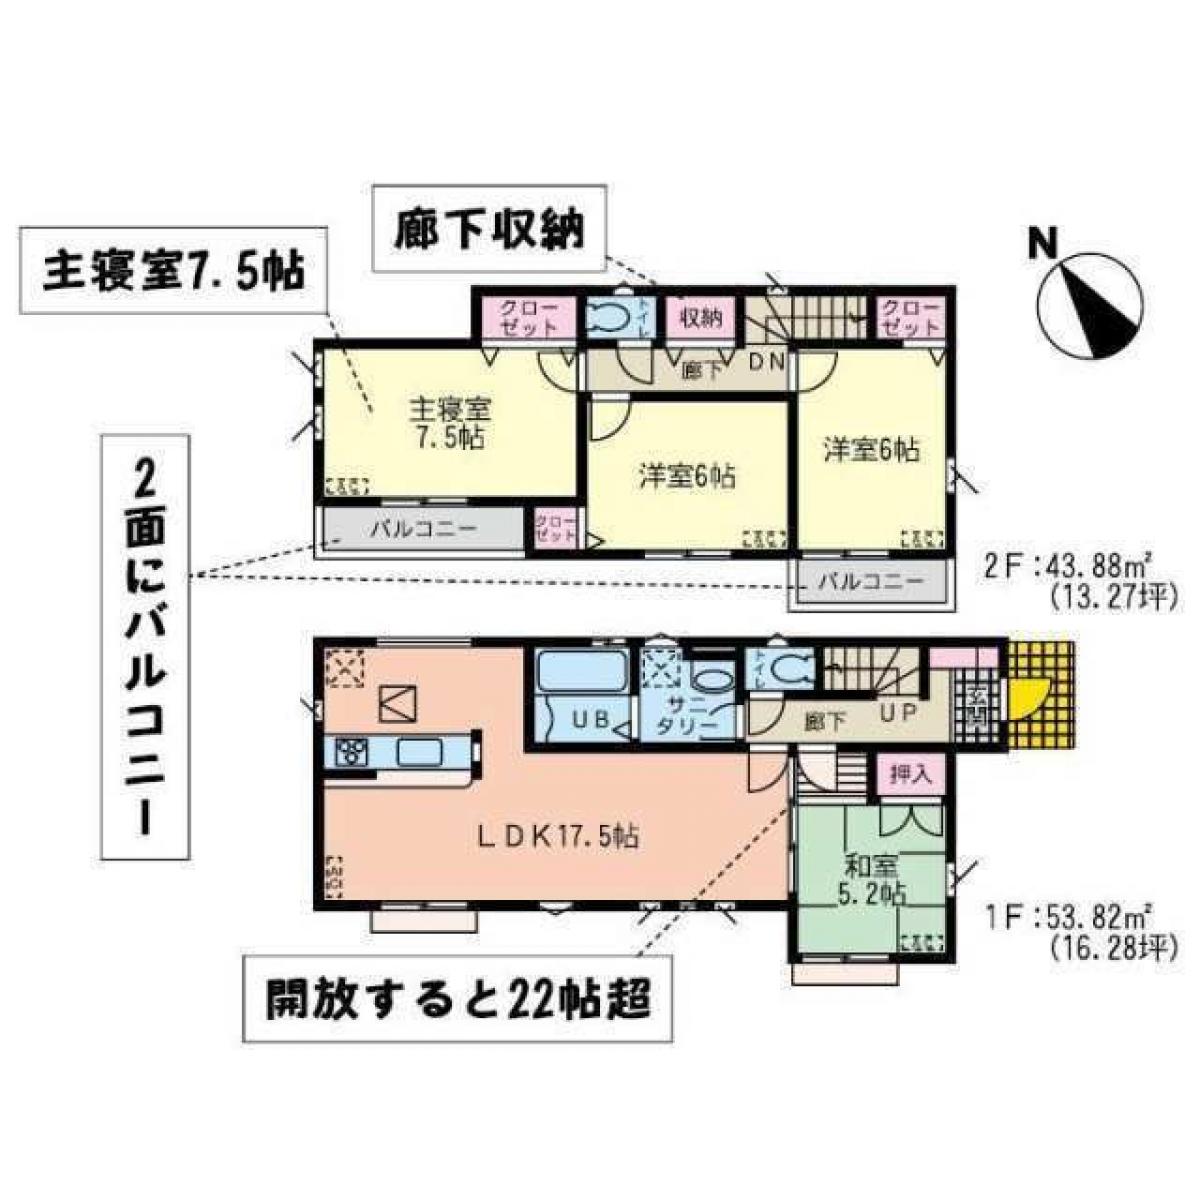 Picture of Home For Sale in Nagareyama Shi, Chiba, Japan